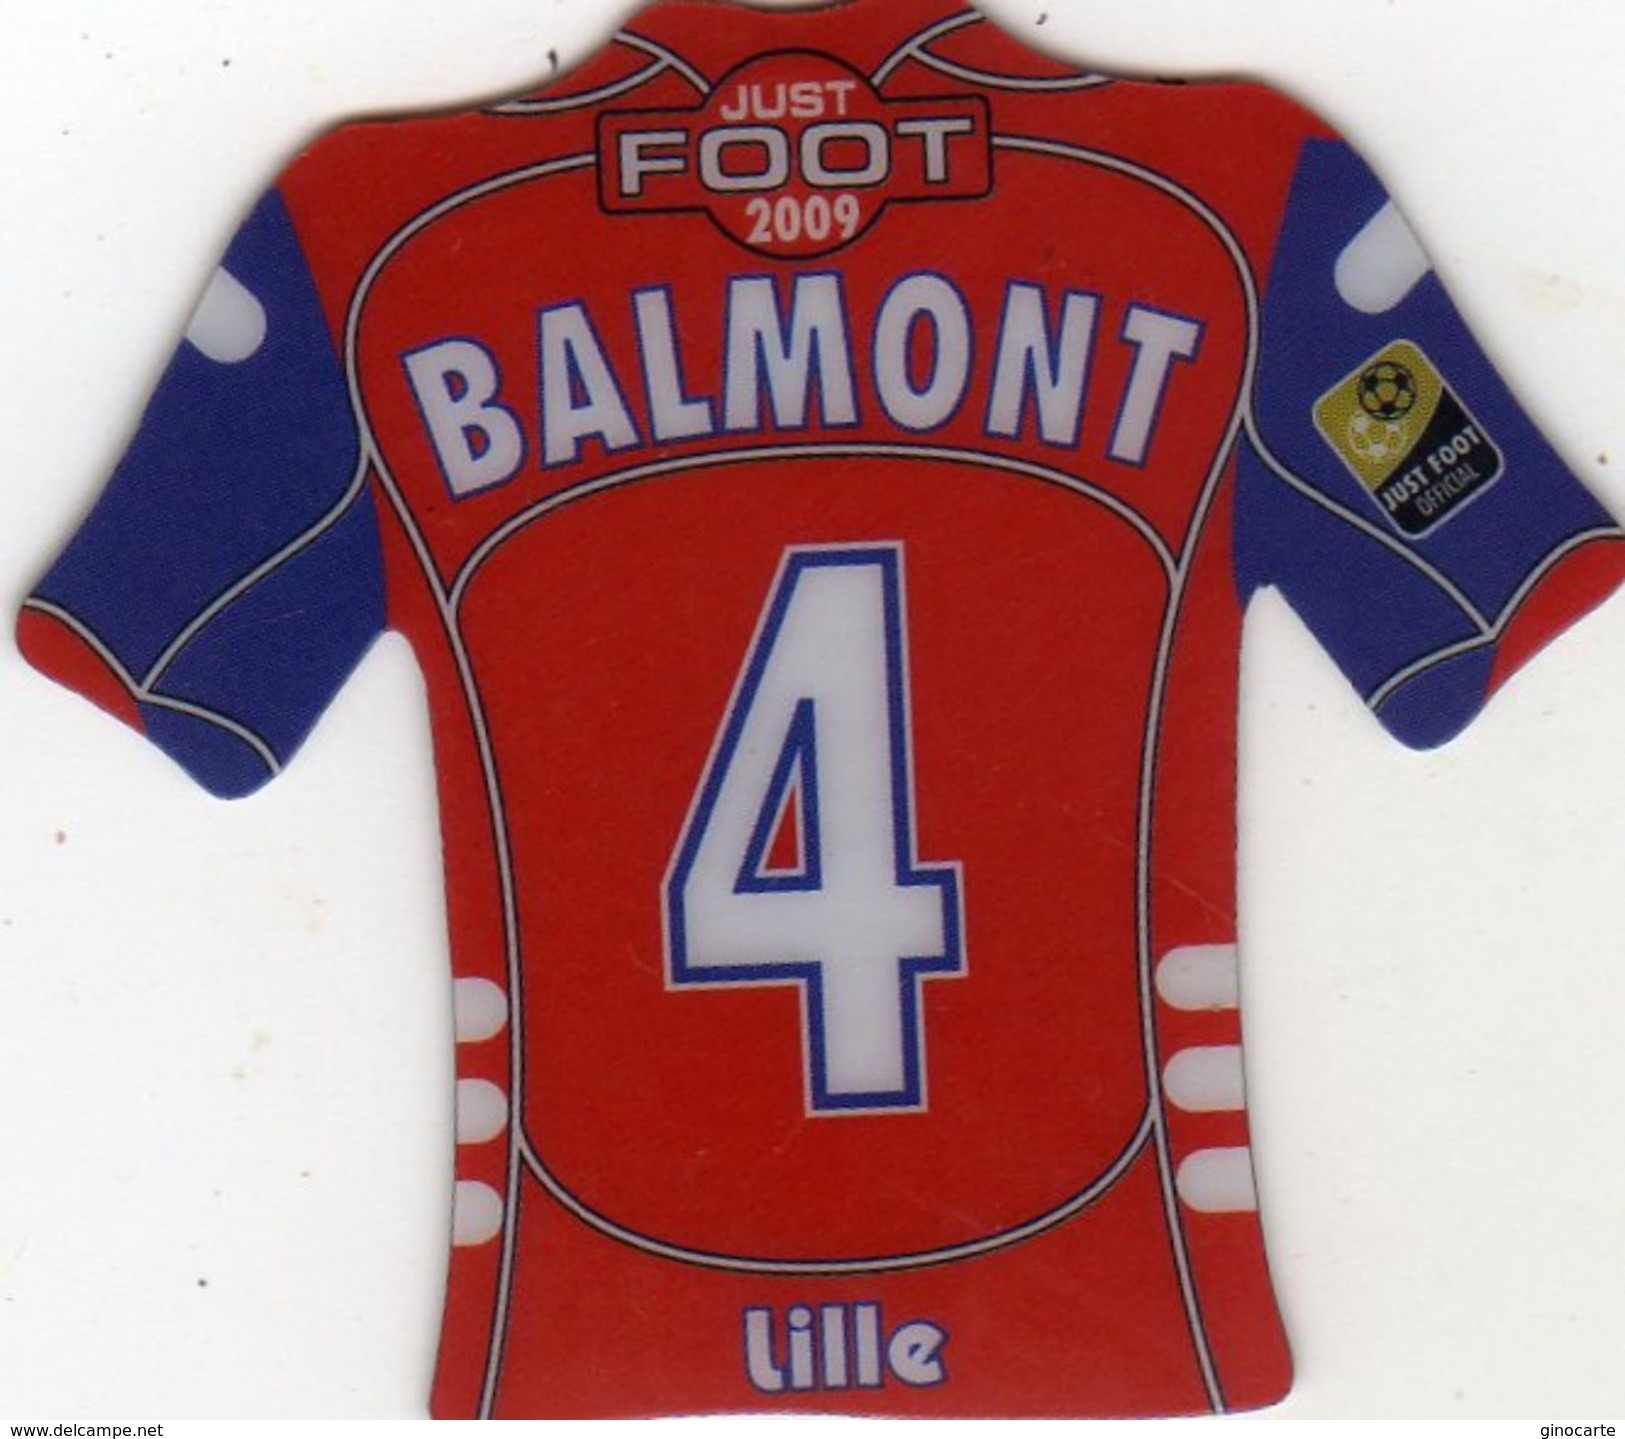 Magnet Magnets Maillot De Football Pitch Auxerre Lille Balmont 2009 - Sport